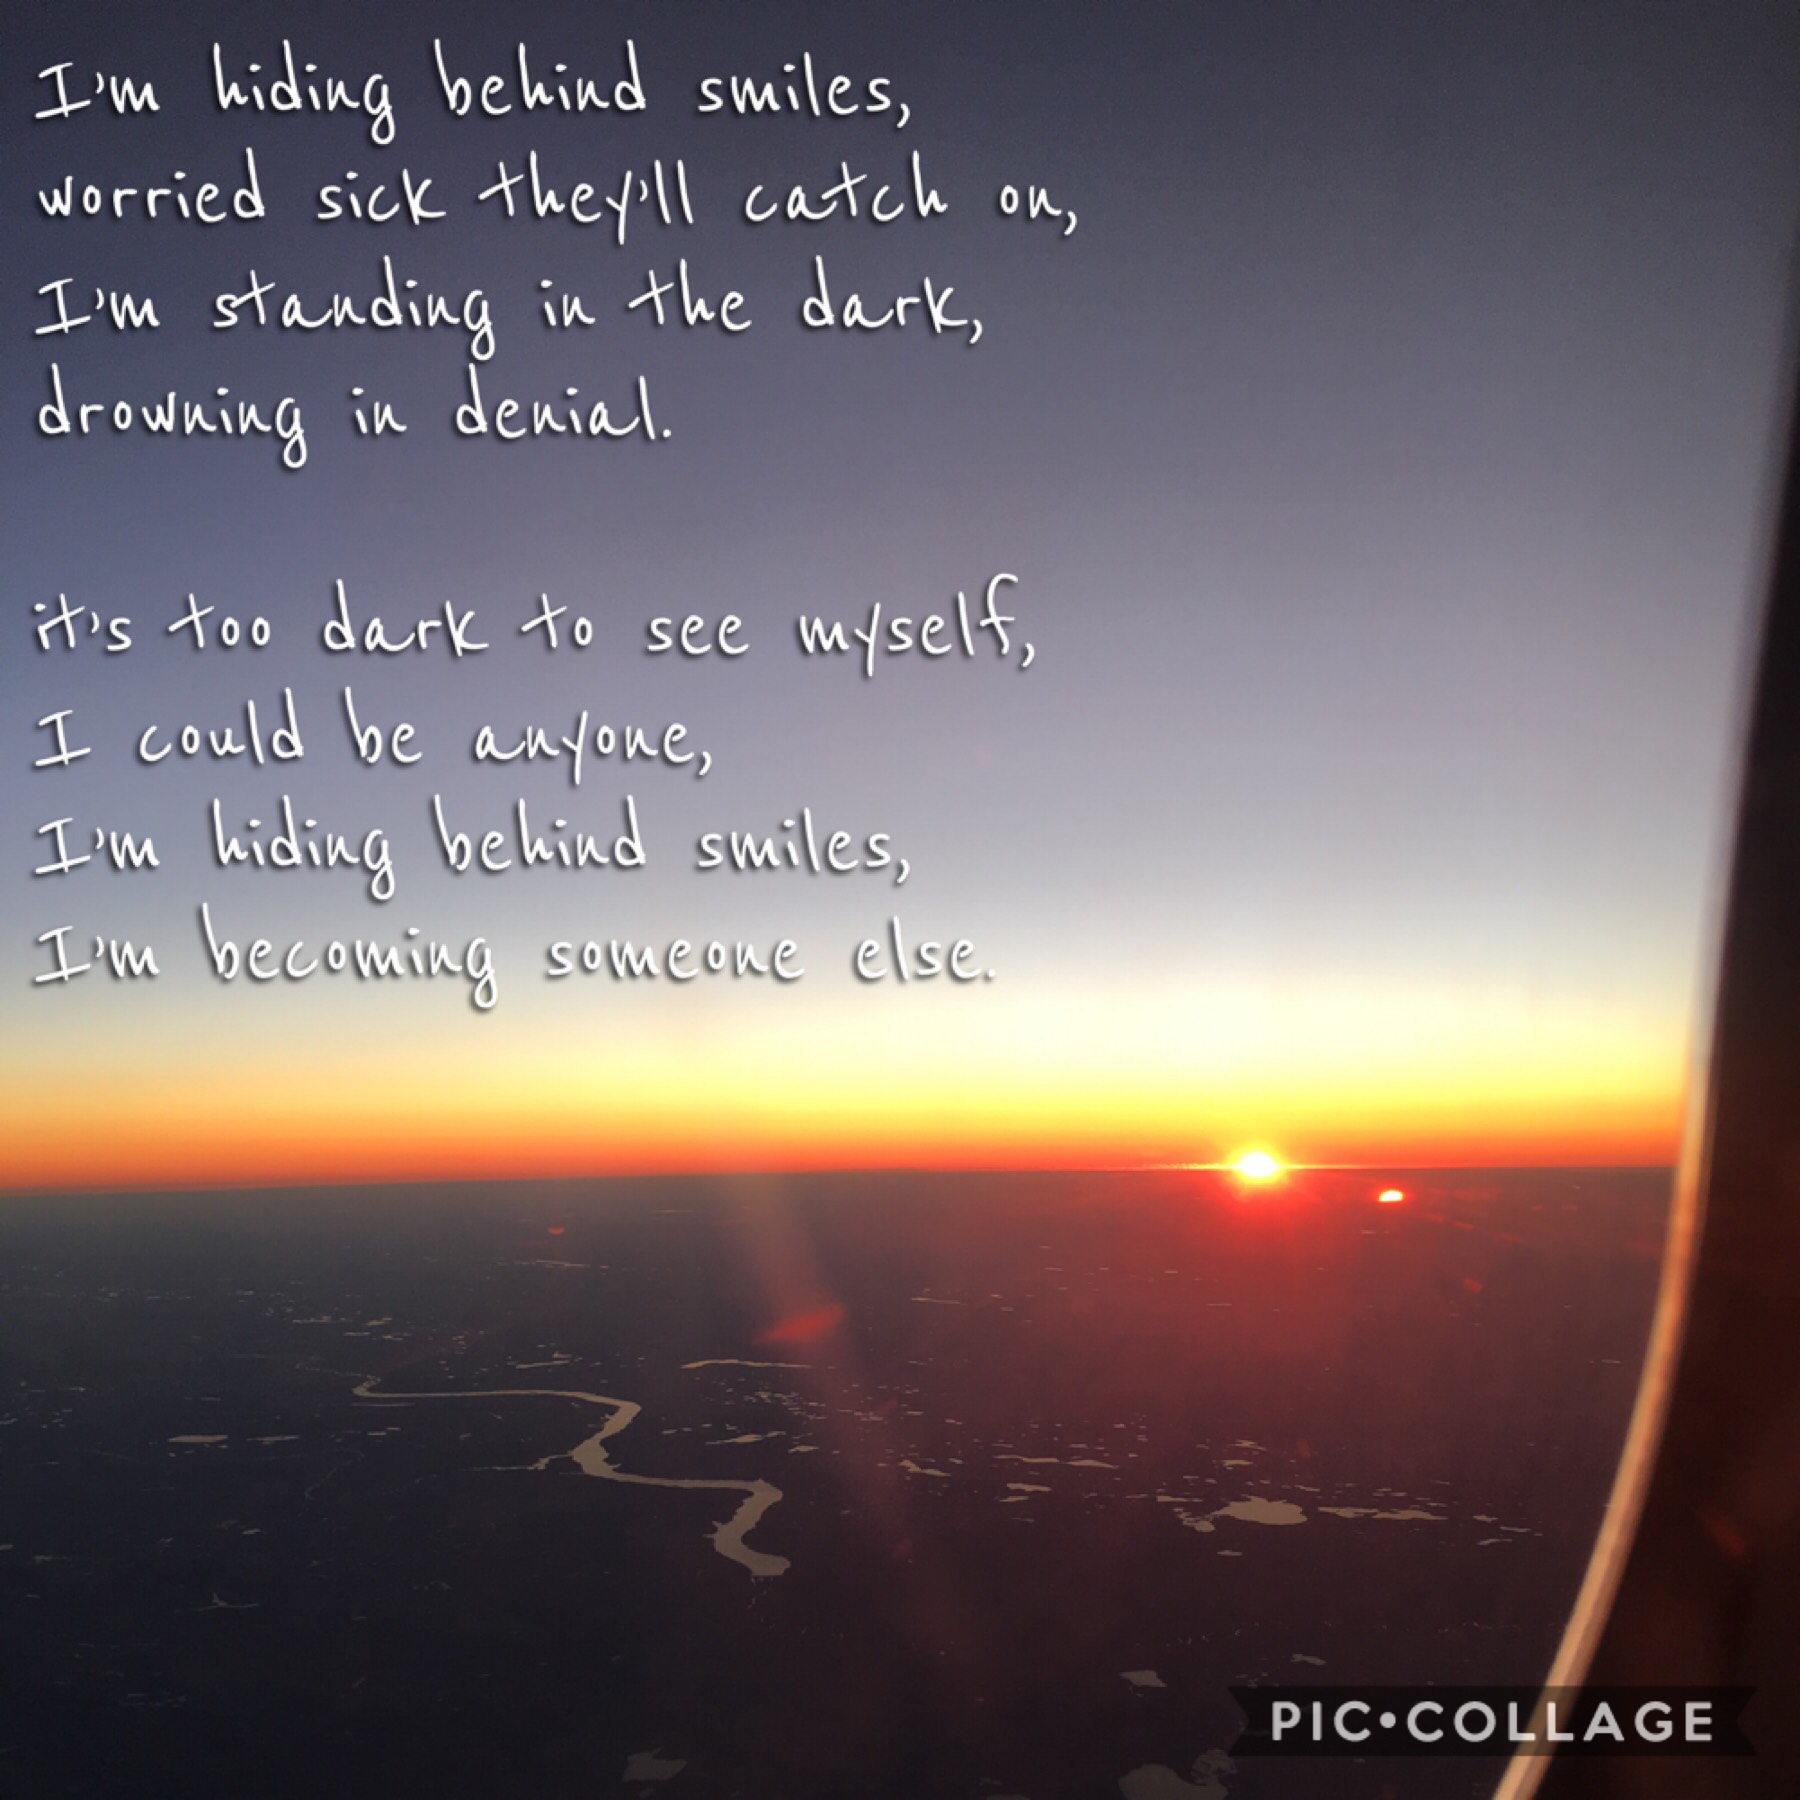 I wrote a poem and took this picture. Which do you prefer: sunrise or sunset?